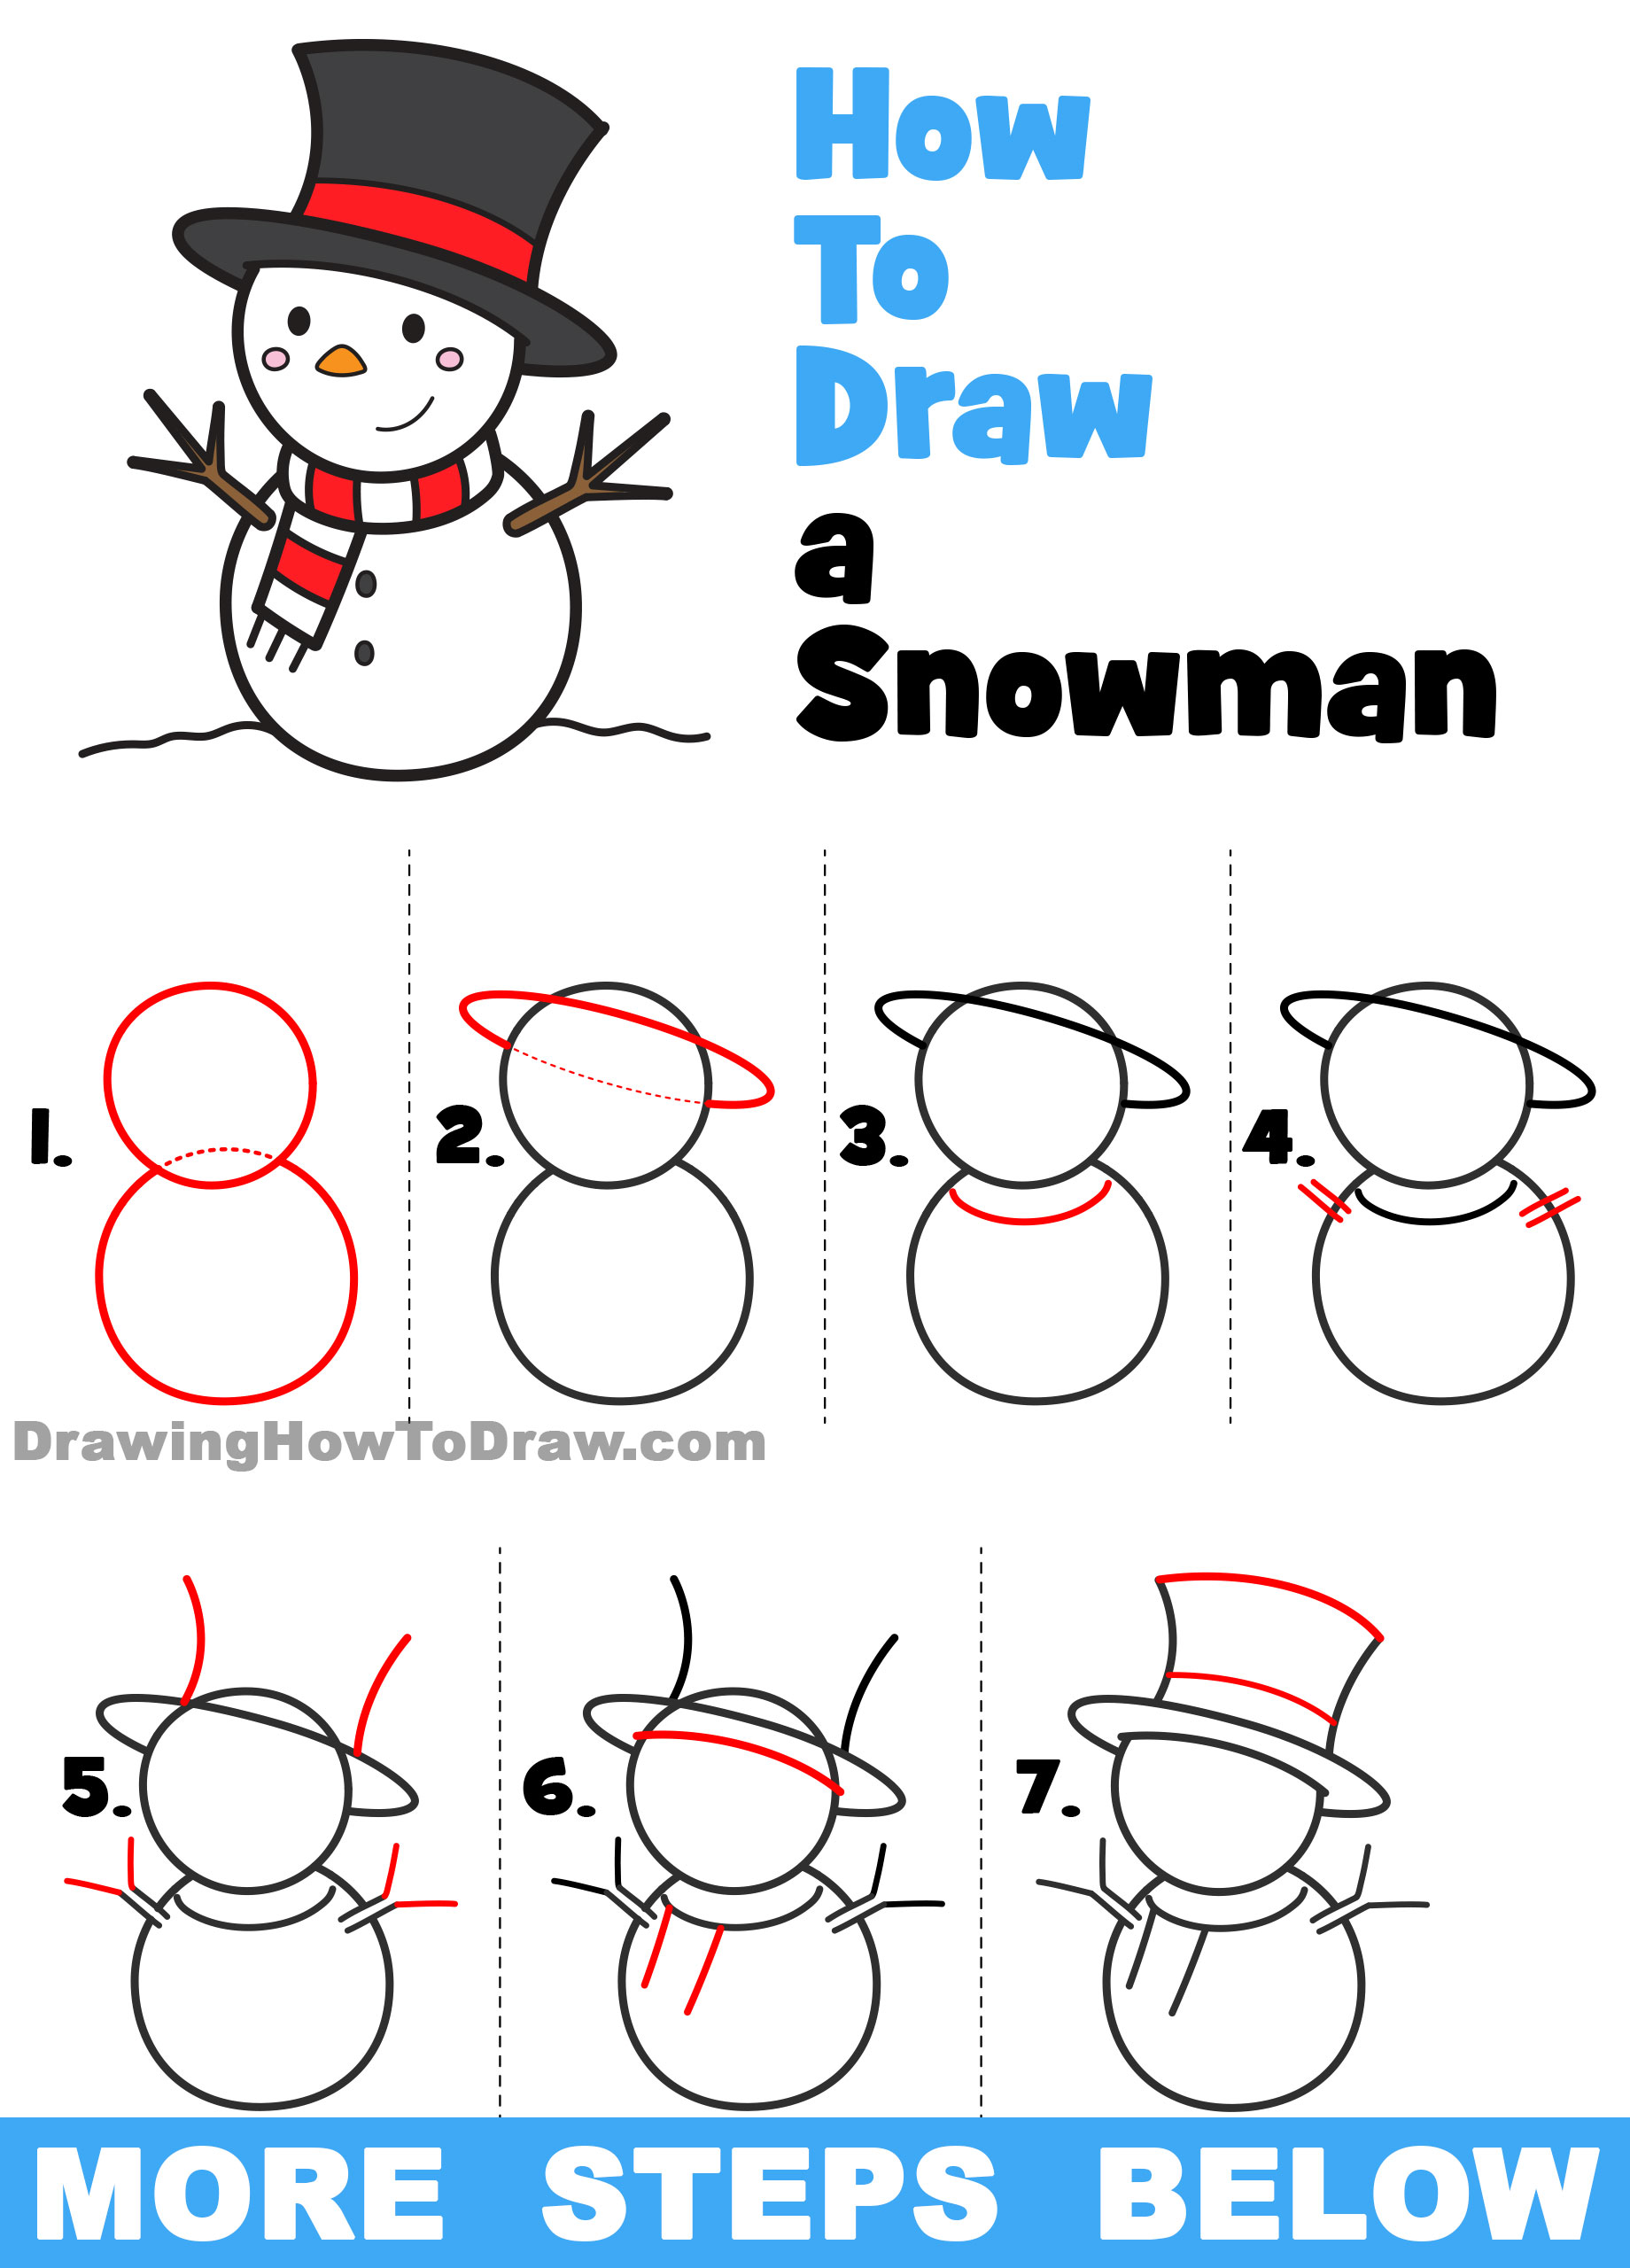 how-to-draw-kawaii-cherries-in-four-steps-simple-easy-drawings-white-background  | Doodle art for beginners, Easy drawings, Easy drawings for kids